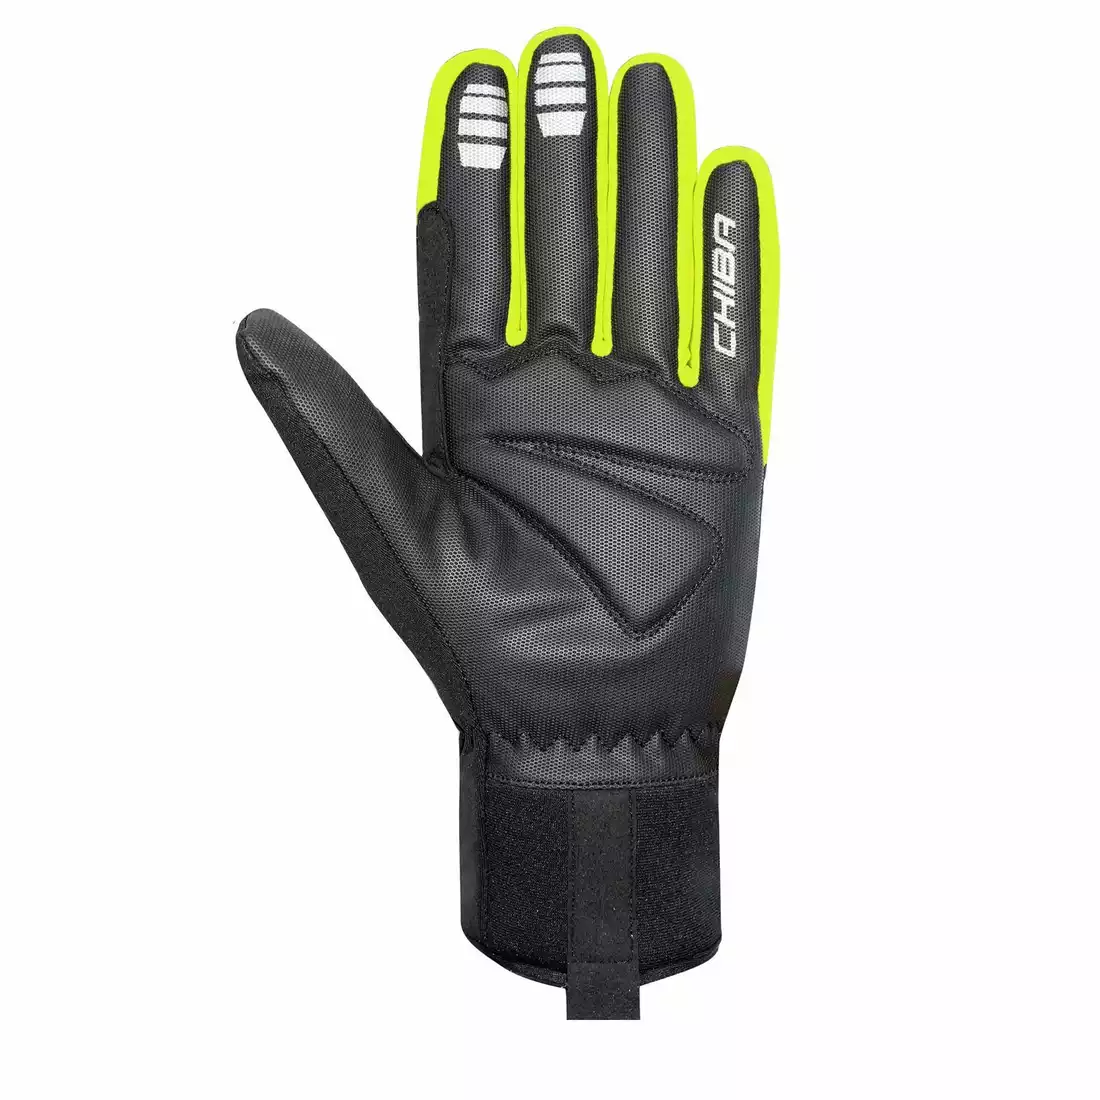 WATERPROOF CYCLE WINTER GLOVE GLOVES Black Yellow with Rain Cover Chiba Express 